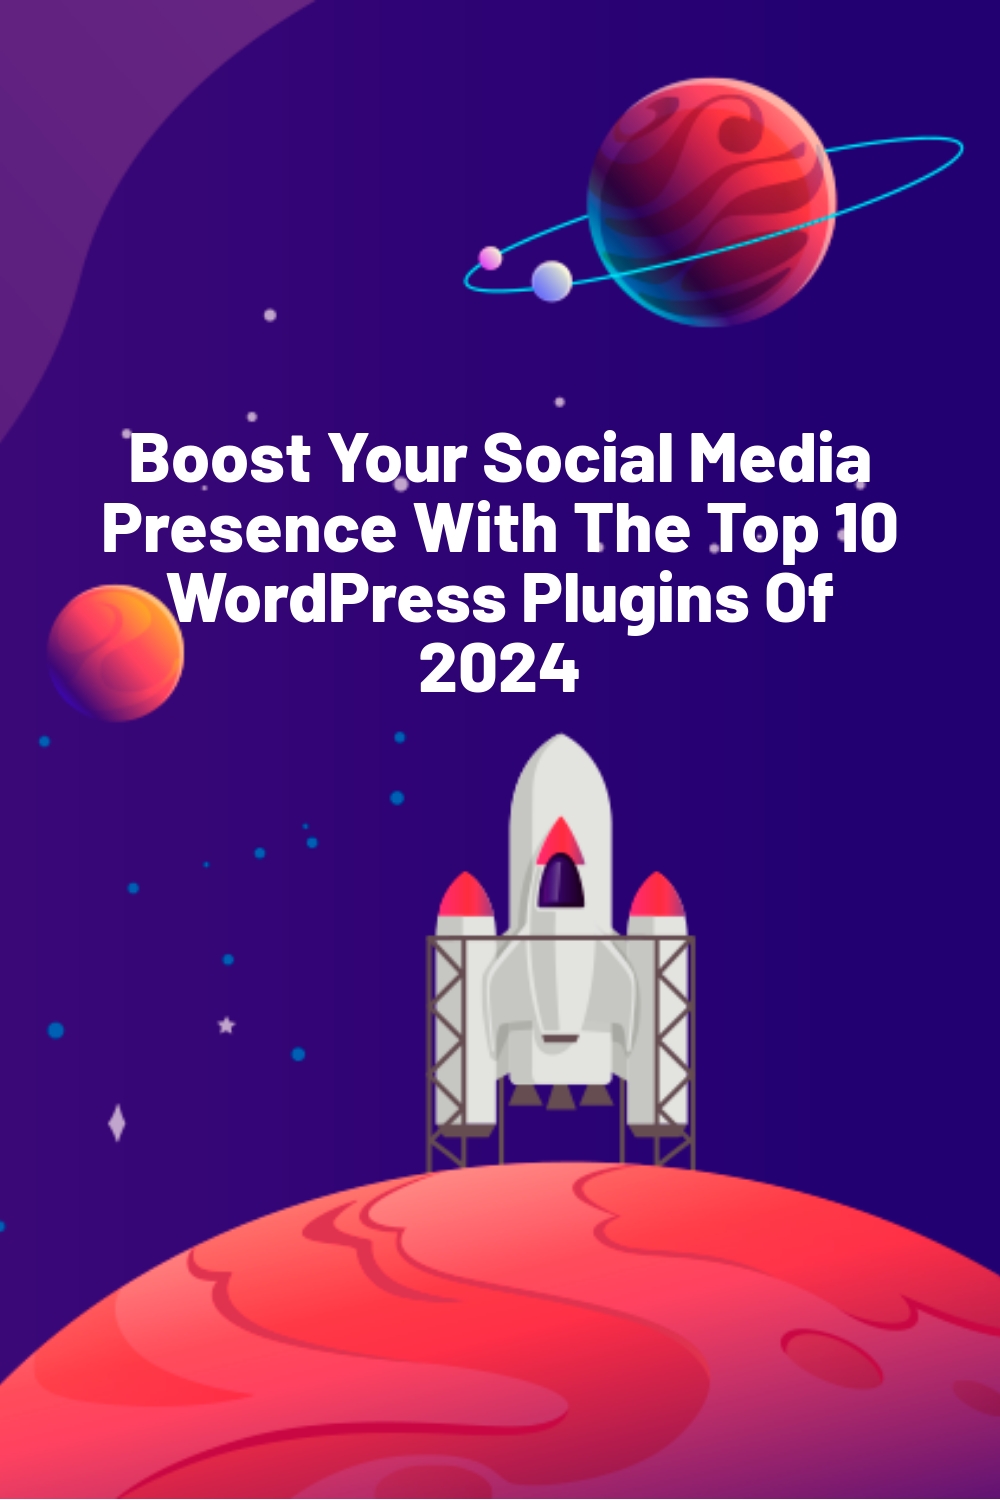 Boost Your Social Media Presence With The Top 10 WordPress Plugins Of 2024